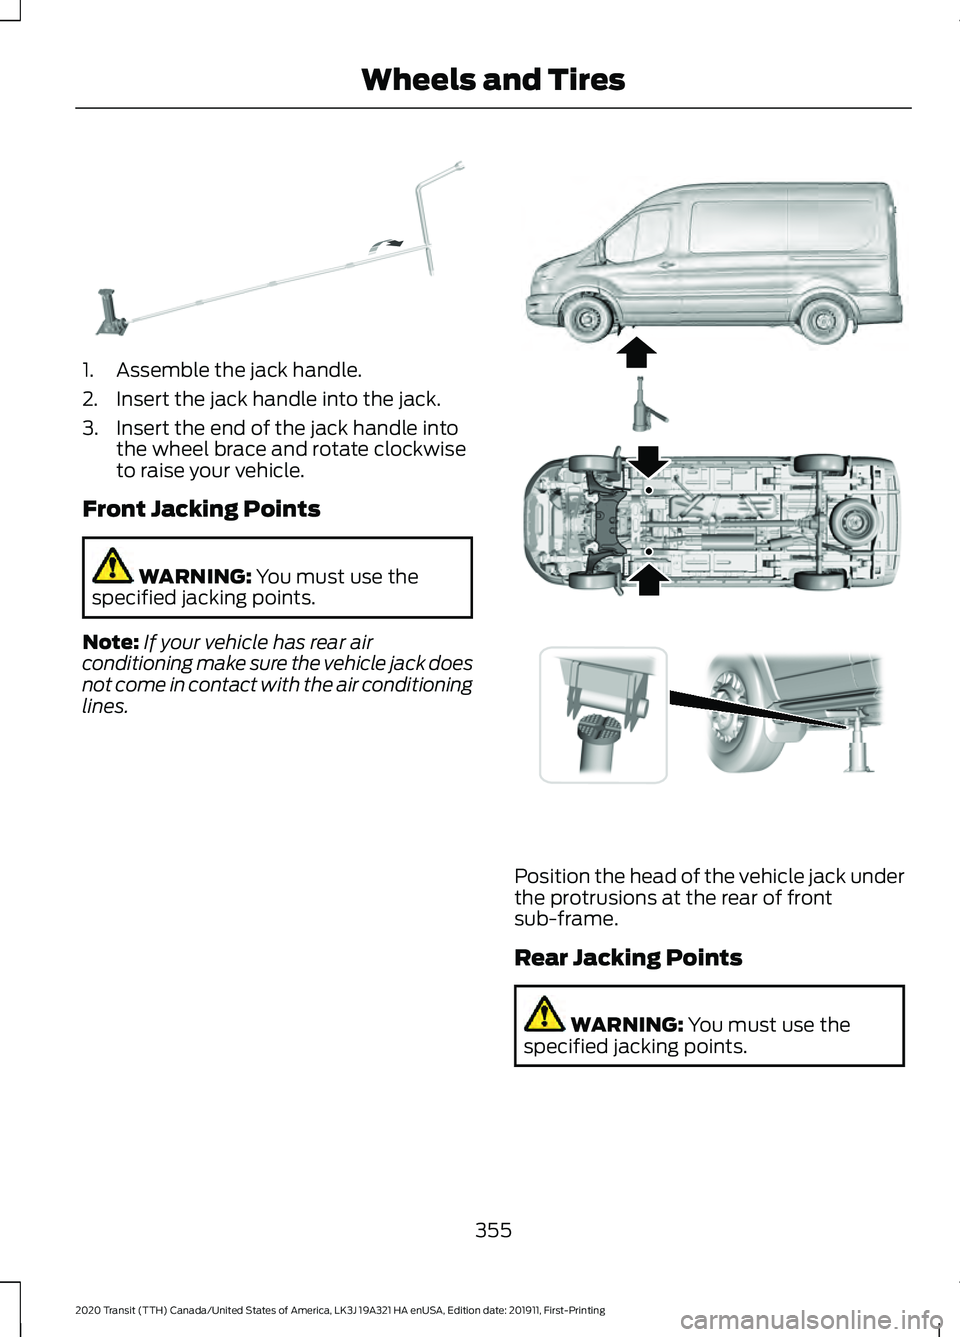 FORD TRANSIT 2020  Owners Manual 1. Assemble the jack handle.
2. Insert the jack handle into the jack.
3. Insert the end of the jack handle into
the wheel brace and rotate clockwise
to raise your vehicle.
Front Jacking Points WARNING